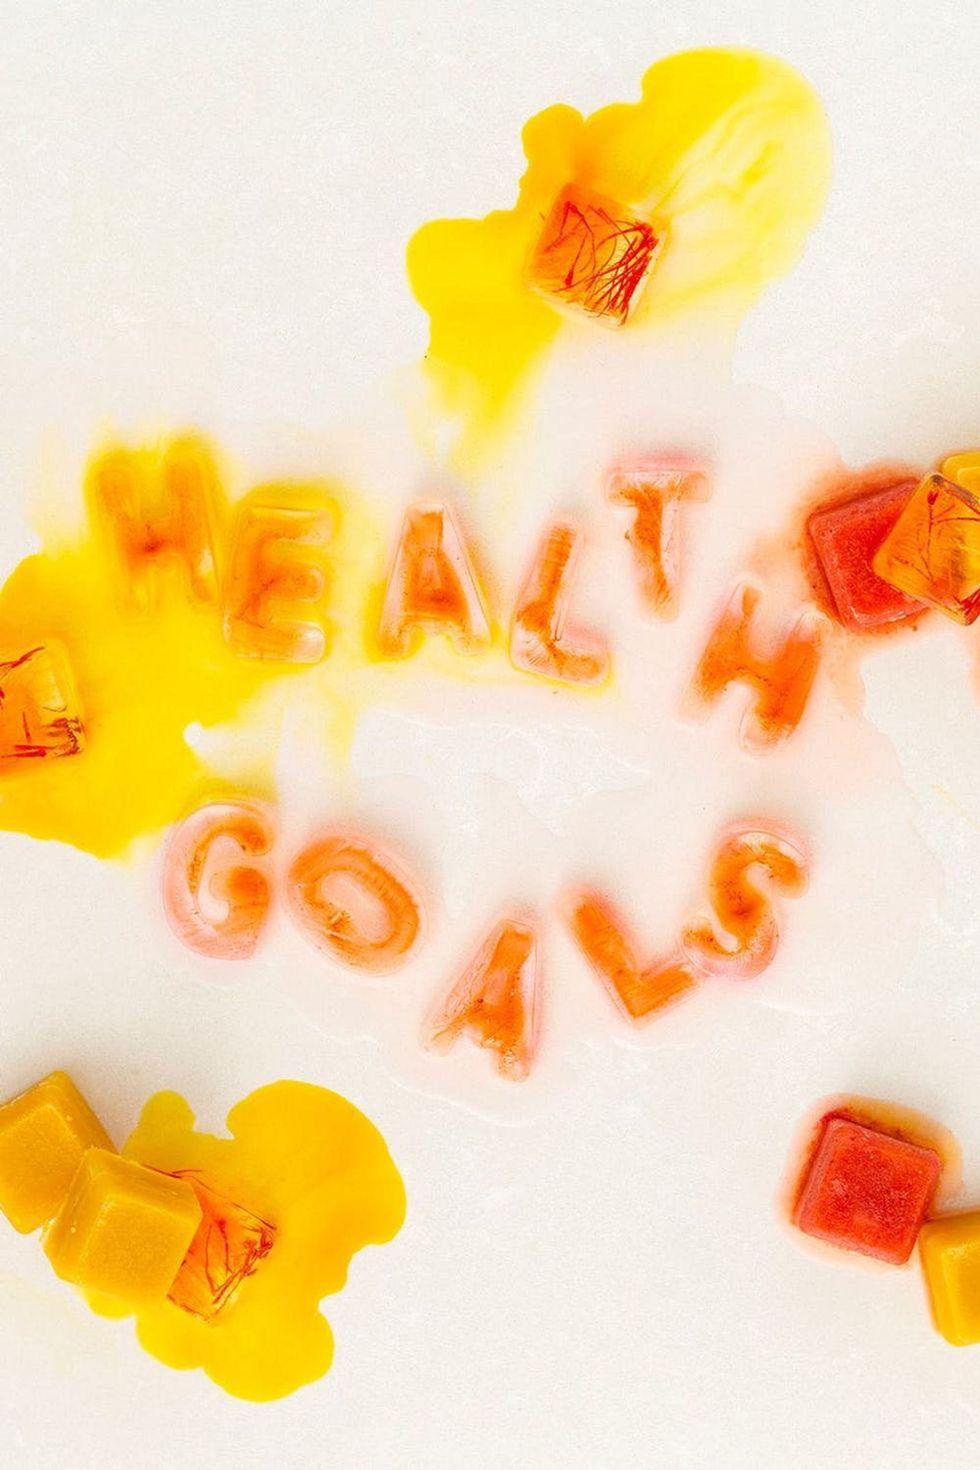 health goals spelled out in ice cubes